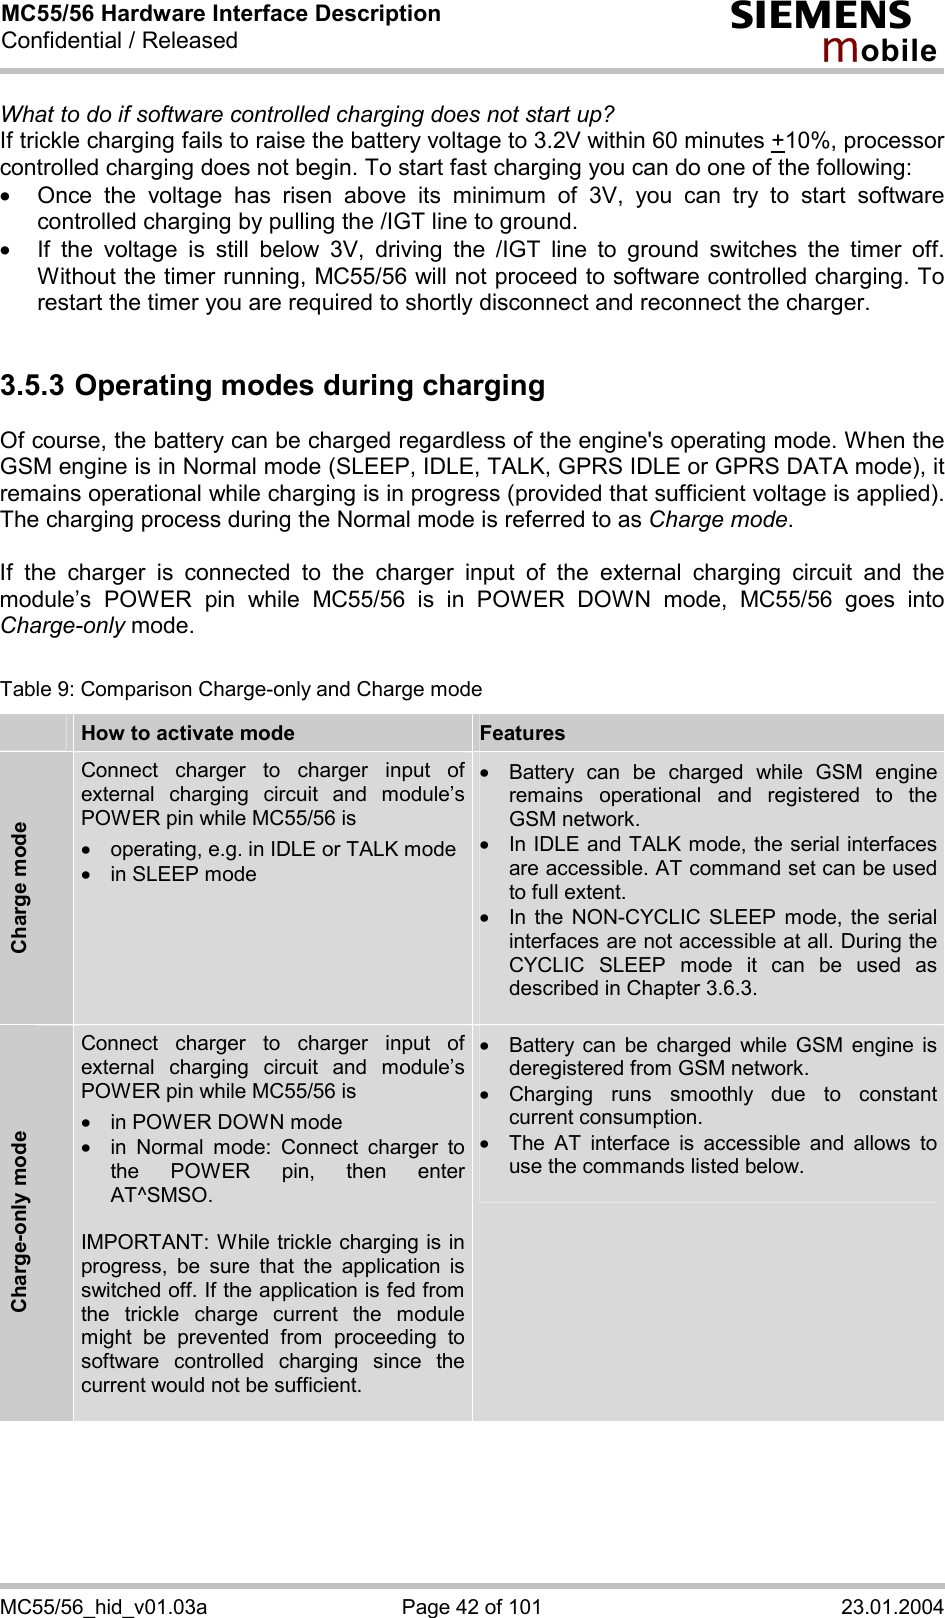 MC55/56 Hardware Interface Description Confidential / Released s mo b i l e MC55/56_hid_v01.03a  Page 42 of 101  23.01.2004 What to do if software controlled charging does not start up? If trickle charging fails to raise the battery voltage to 3.2V within 60 minutes +10%, processor controlled charging does not begin. To start fast charging you can do one of the following:  ·  Once the voltage has risen above its minimum of 3V, you can try to start software controlled charging by pulling the /IGT line to ground.  ·  If the voltage is still below 3V, driving the /IGT line to ground switches the timer off. Without the timer running, MC55/56 will not proceed to software controlled charging. To restart the timer you are required to shortly disconnect and reconnect the charger.  3.5.3 Operating modes during charging Of course, the battery can be charged regardless of the engine&apos;s operating mode. When the GSM engine is in Normal mode (SLEEP, IDLE, TALK, GPRS IDLE or GPRS DATA mode), it remains operational while charging is in progress (provided that sufficient voltage is applied). The charging process during the Normal mode is referred to as Charge mode.   If the charger is connected to the charger input of the external charging circuit and the module’s POWER pin while MC55/56 is in POWER DOWN mode, MC55/56 goes into Charge-only mode.   Table 9: Comparison Charge-only and Charge mode  How to activate mode  Features Charge mode Connect charger to charger input of external charging circuit and module’s POWER pin while MC55/56 is ·  operating, e.g. in IDLE or TALK mode ·  in SLEEP mode ·  Battery can be charged while GSM engine remains operational and registered to the GSM network. ·  In IDLE and TALK mode, the serial interfaces are accessible. AT command set can be used to full extent. ·  In the NON-CYCLIC SLEEP mode, the serial interfaces are not accessible at all. During the CYCLIC SLEEP mode it can be used as described in Chapter 3.6.3.  Charge-only mode Connect charger to charger input of external charging circuit and module’s POWER pin while MC55/56 is ·  in POWER DOWN mode ·  in Normal mode: Connect charger to the POWER pin, then enter AT^SMSO.  IMPORTANT: While trickle charging is in progress, be sure that the application is switched off. If the application is fed from the trickle charge current the module might be prevented from proceeding to software controlled charging since the current would not be sufficient.   ·  Battery can be charged while GSM engine is deregistered from GSM network. ·  Charging runs smoothly due to constant current consumption. ·  The AT interface is accessible and allows to use the commands listed below.     